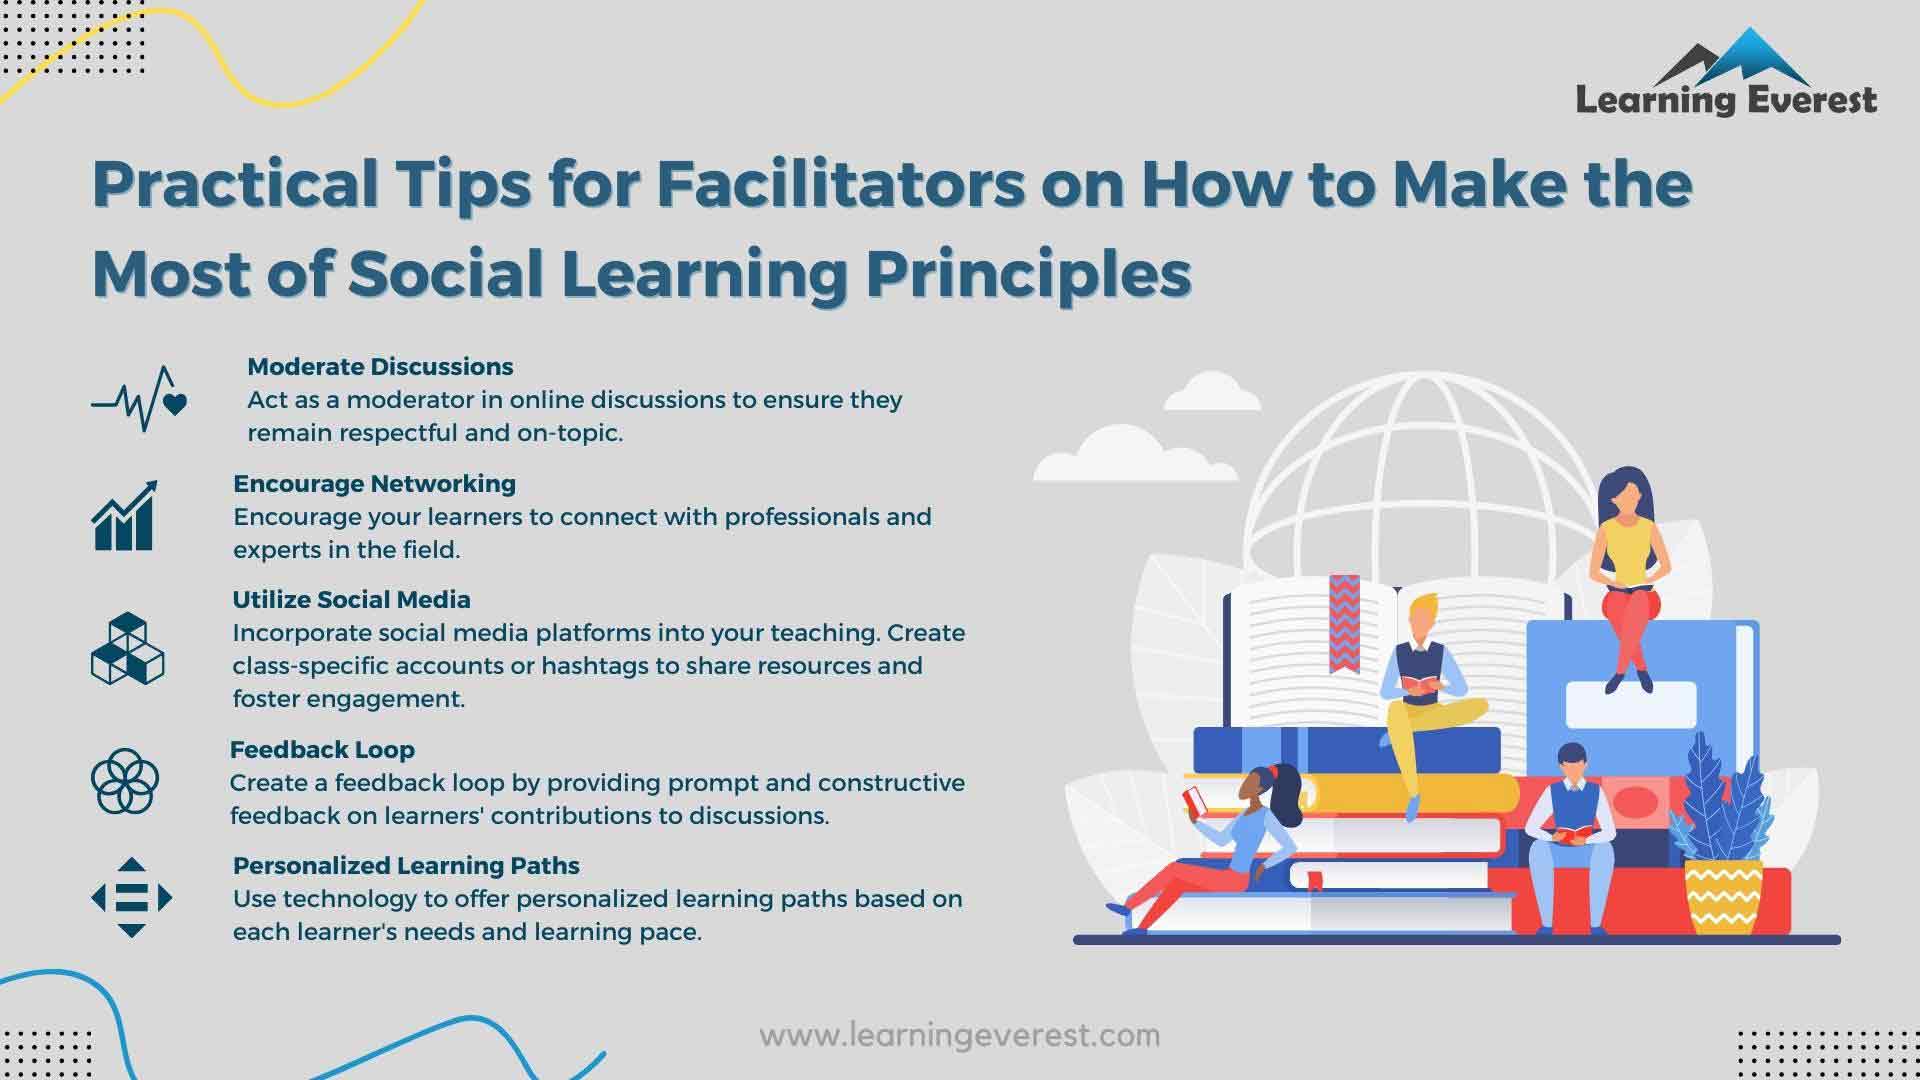 Practical Tips for Facilitators on How to Make the Most of Social Learning Principles